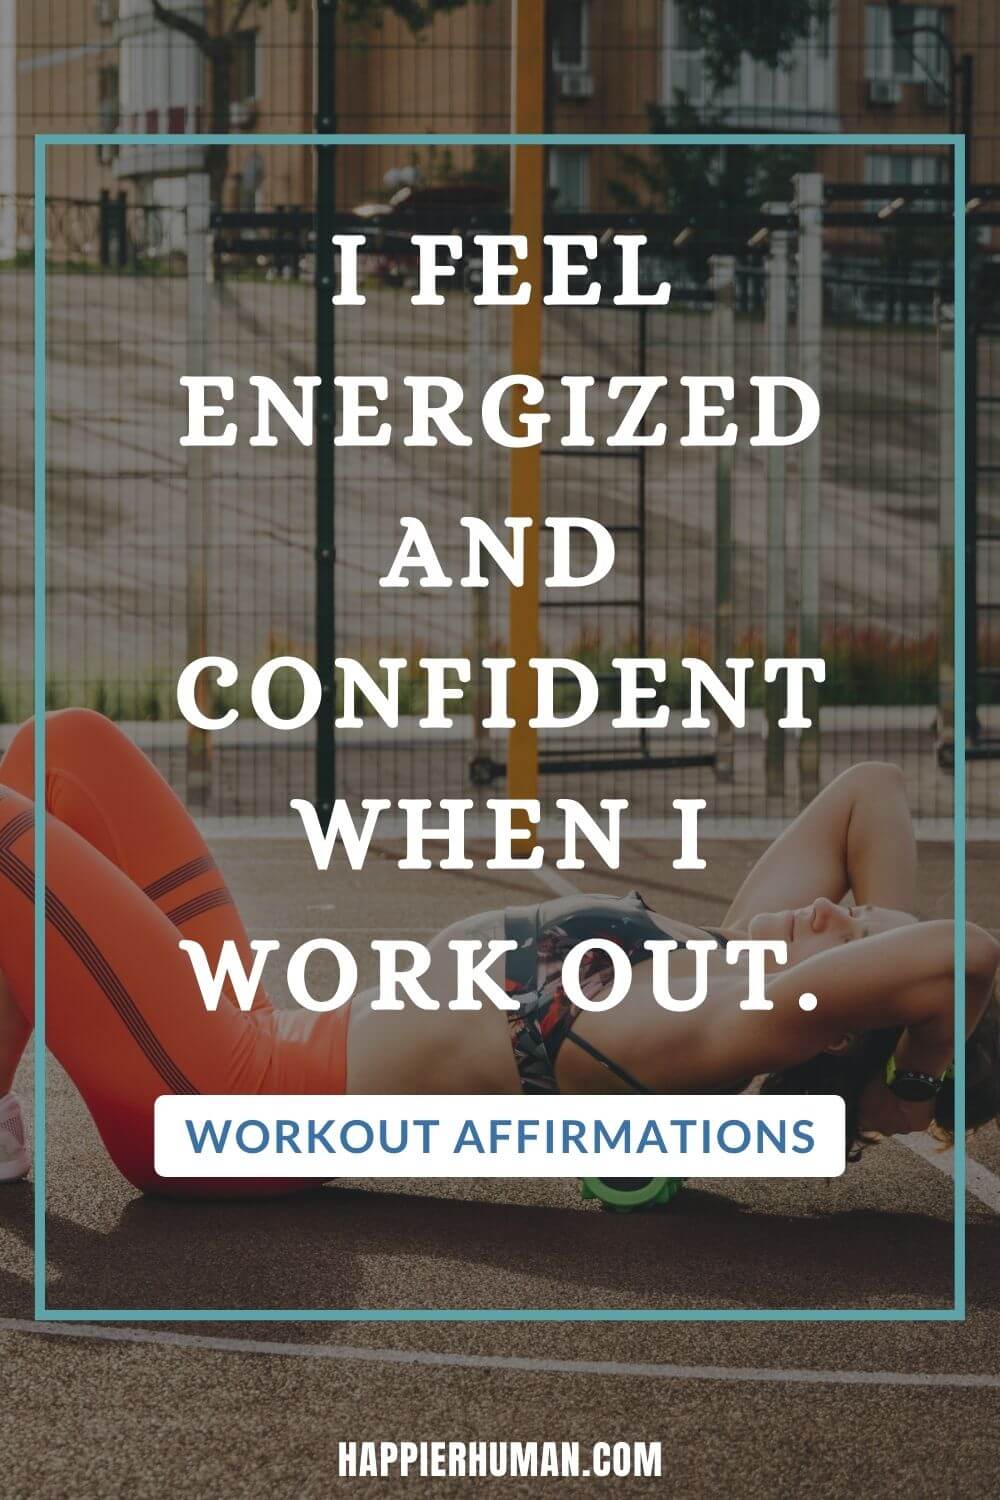 Workout Affirmations - I feel energized and confident when I work out. | pre workout affirmations | weight lifting affirmations | affirmations exercise worksheet